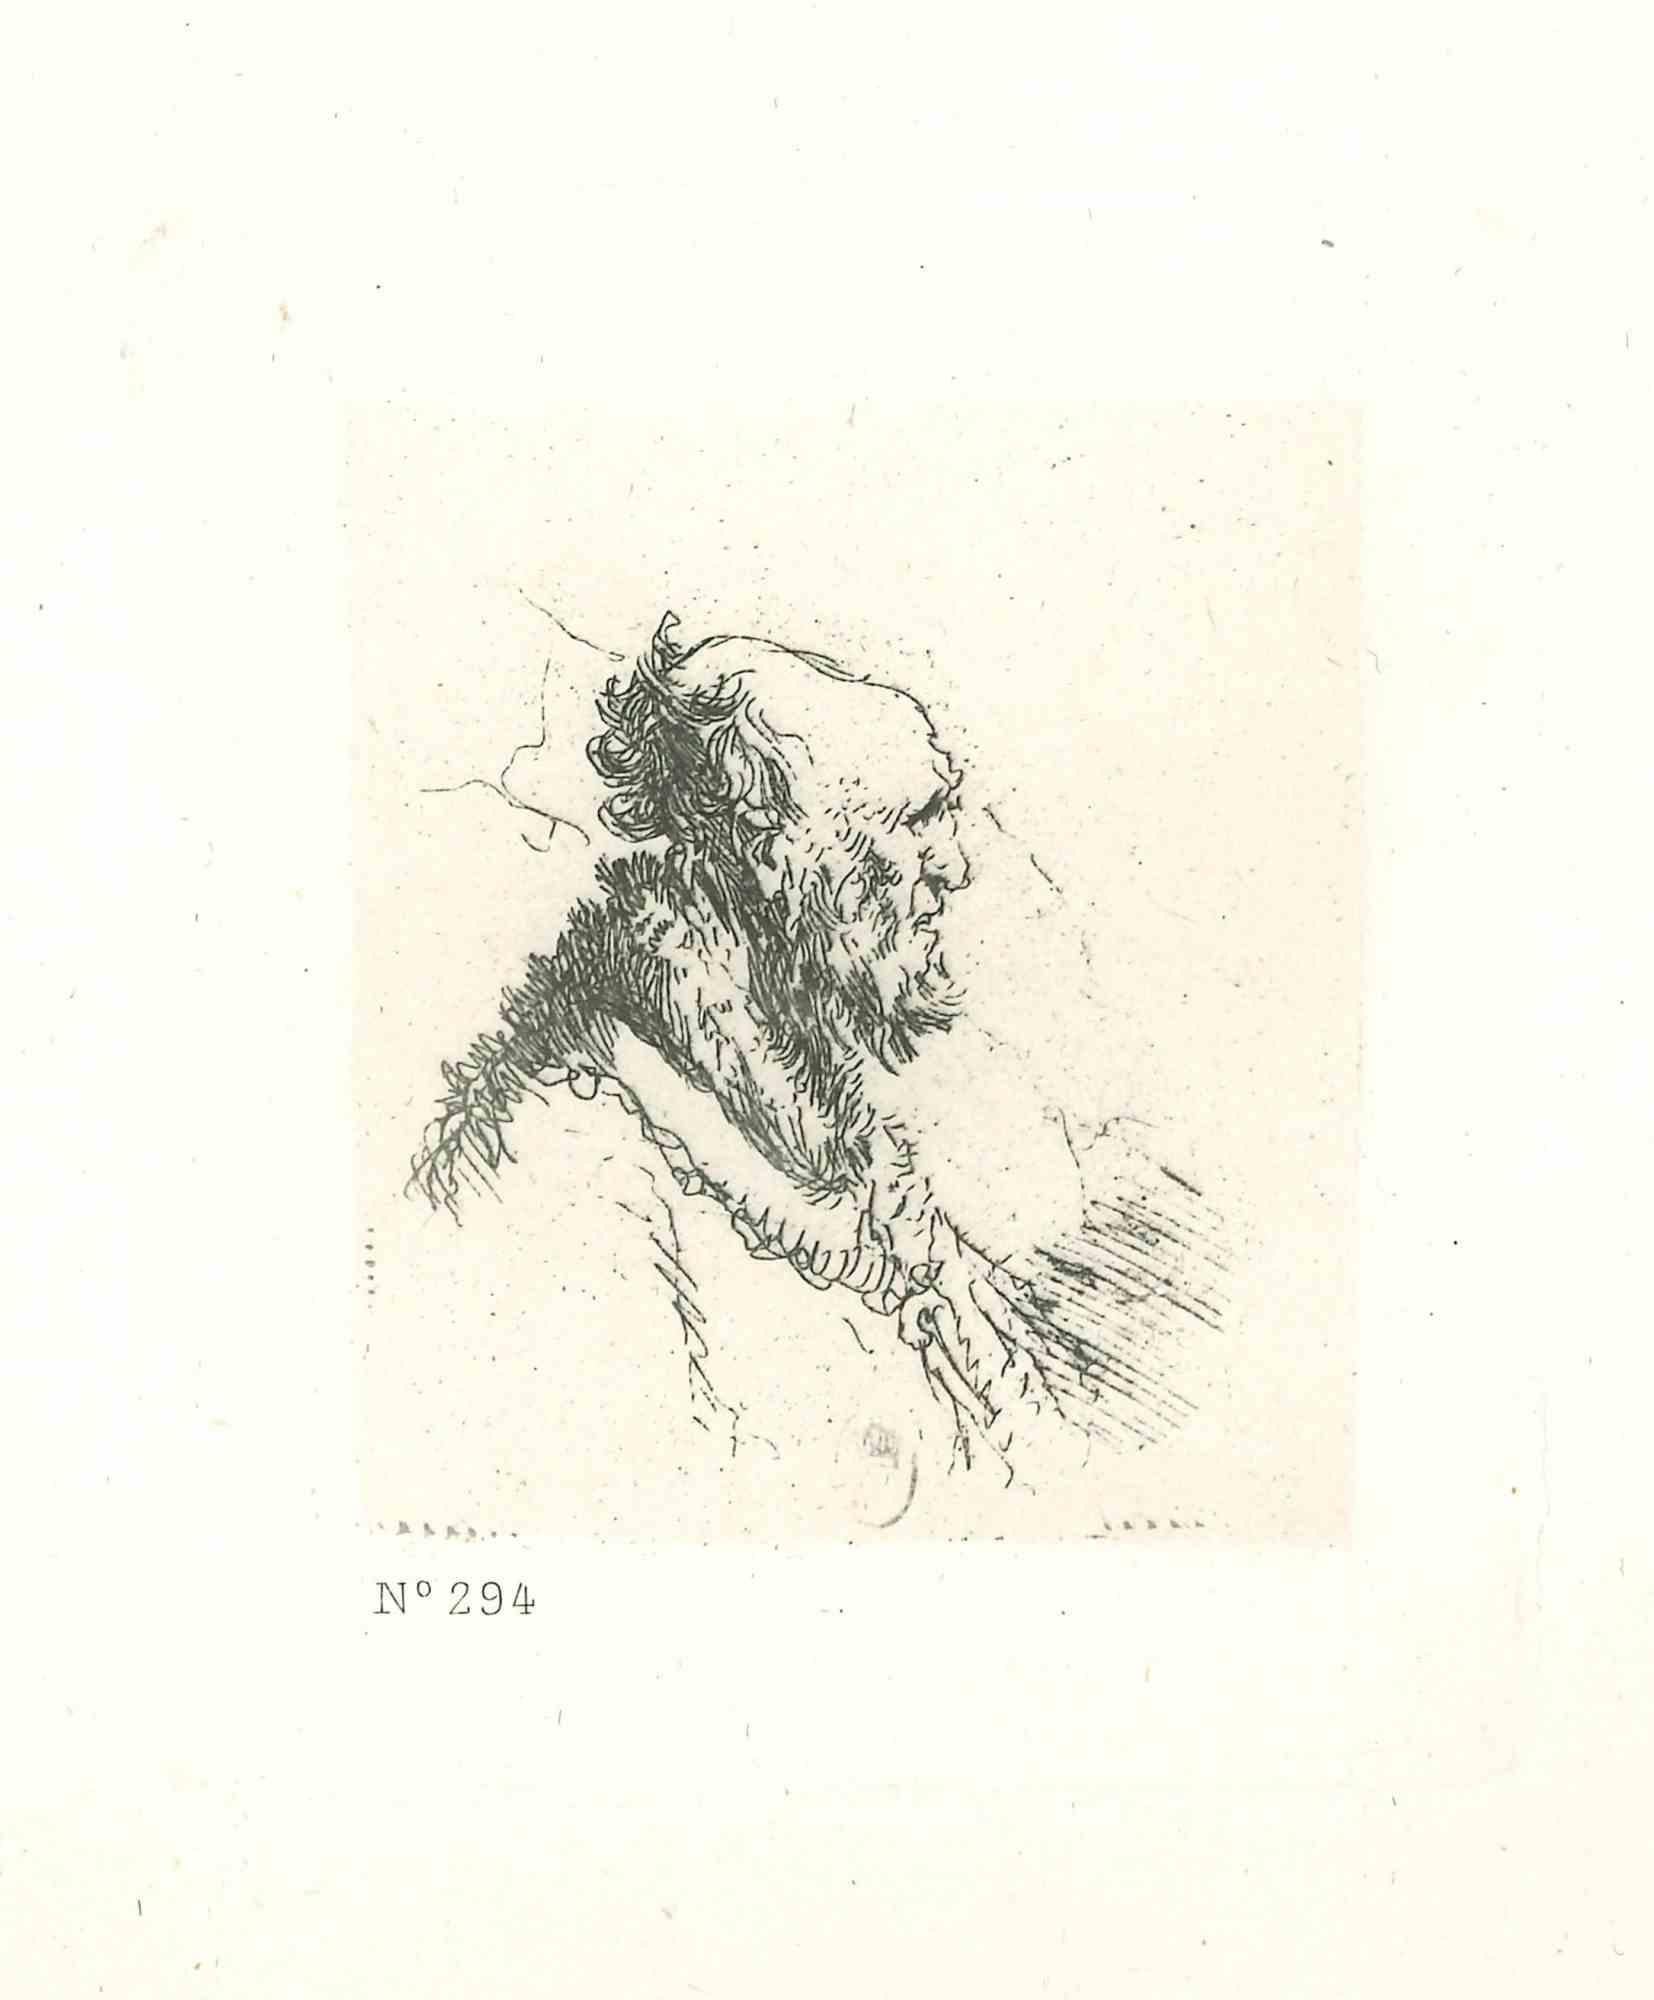 Charles Amand Durand Portrait Print - Bald Old Man with a Short Beard  - Engraving after Rembrandt - 19th Century